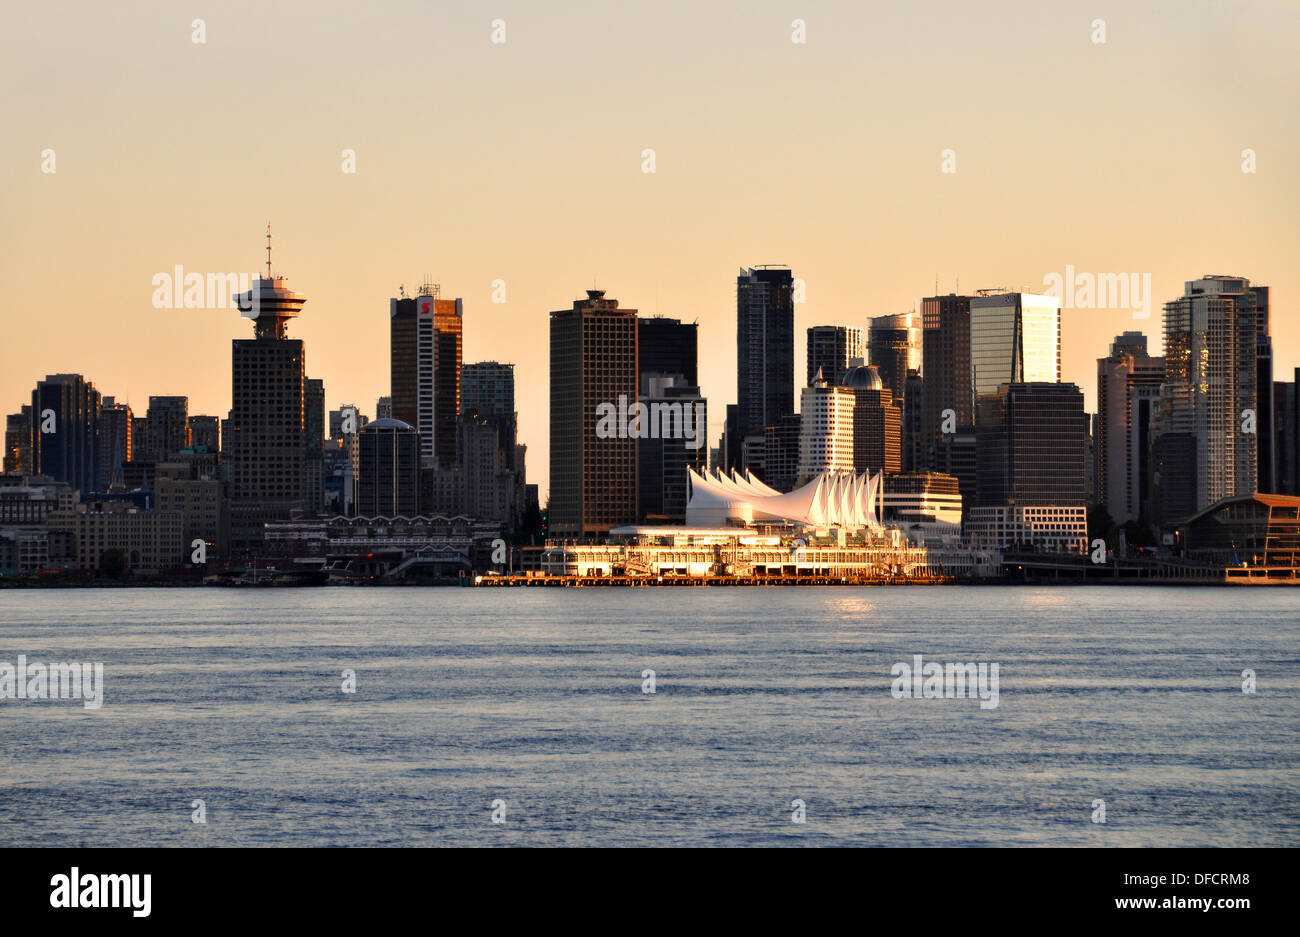 Downtown Vancouver at sunset, British Columbia, Canada Stock Photo